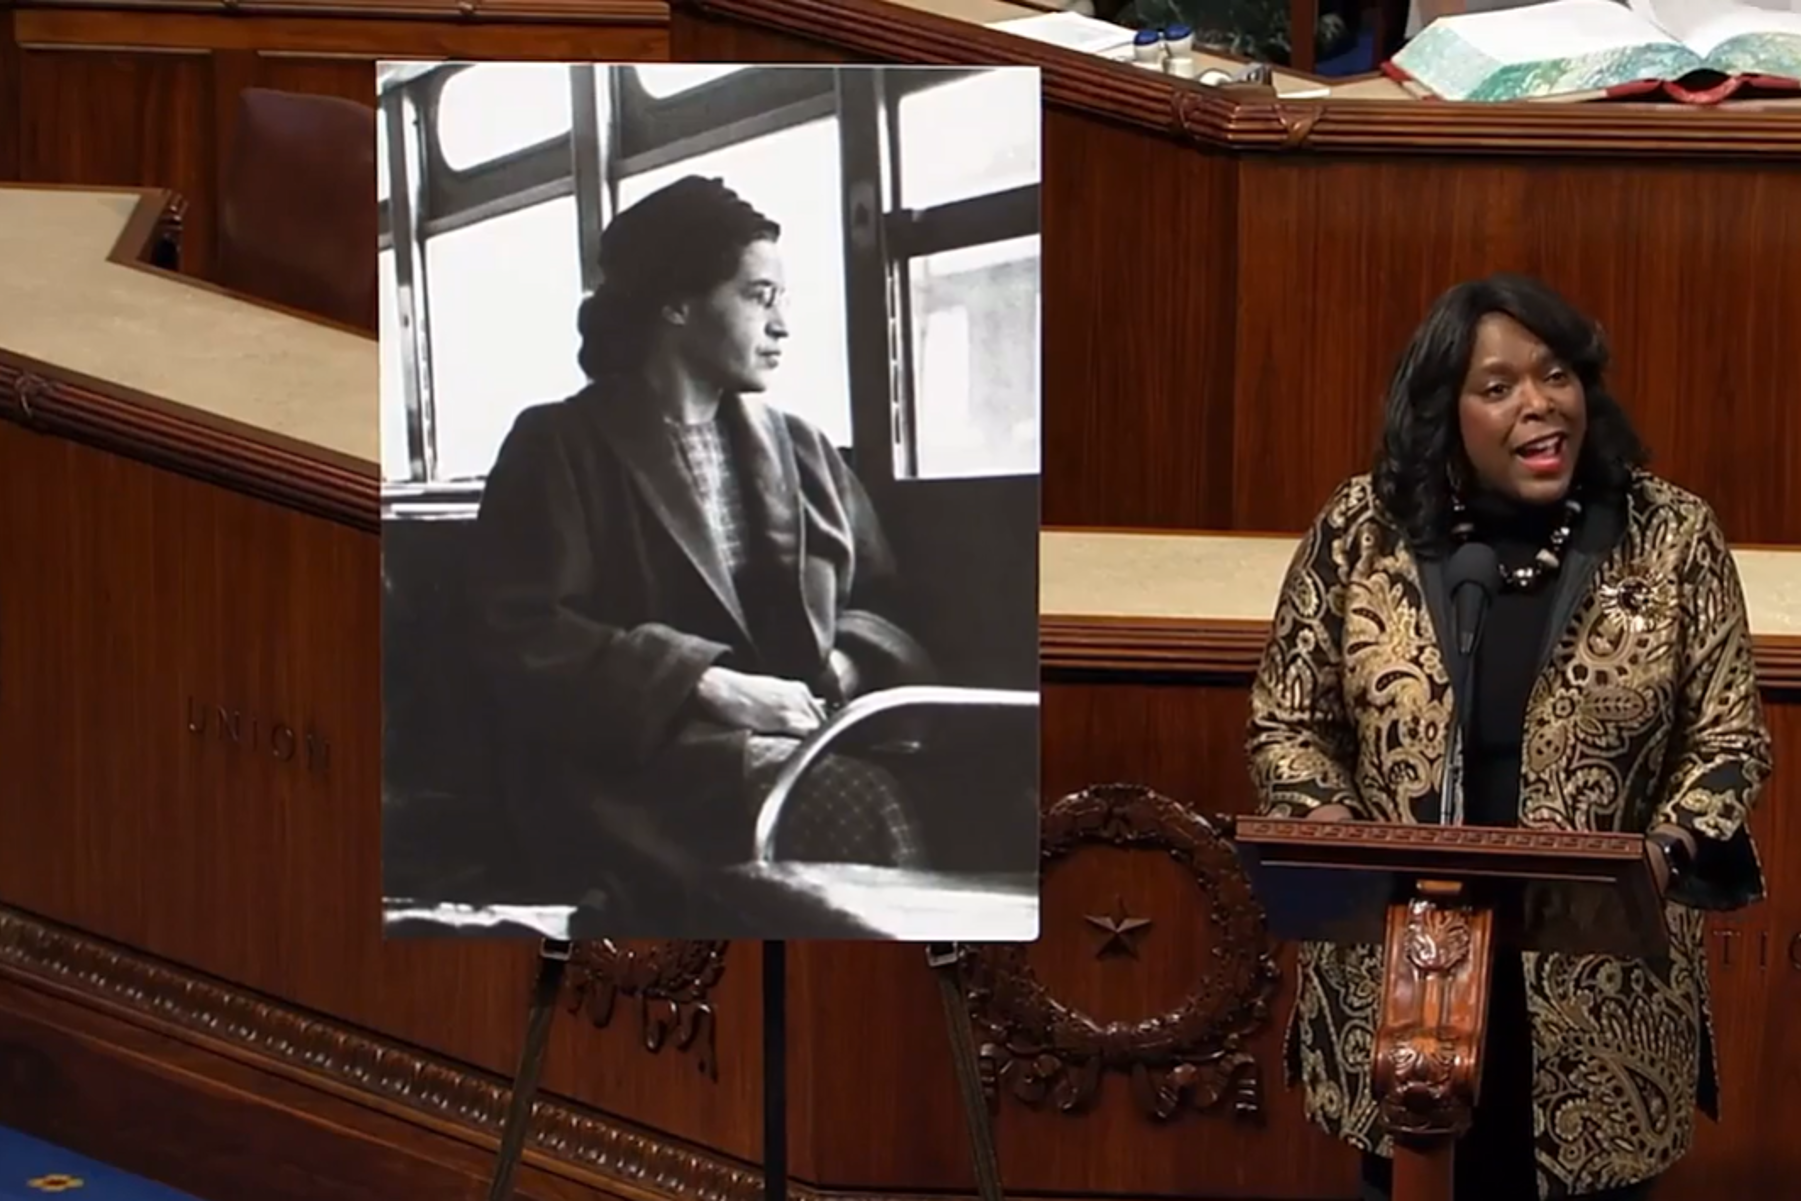 Read More - Reps. Sewell, Beatty, and Horsford Introduce the Rosa Parks Day Act to Designate Dec. 1st as a Federal Holiday Honoring Rosa Parks